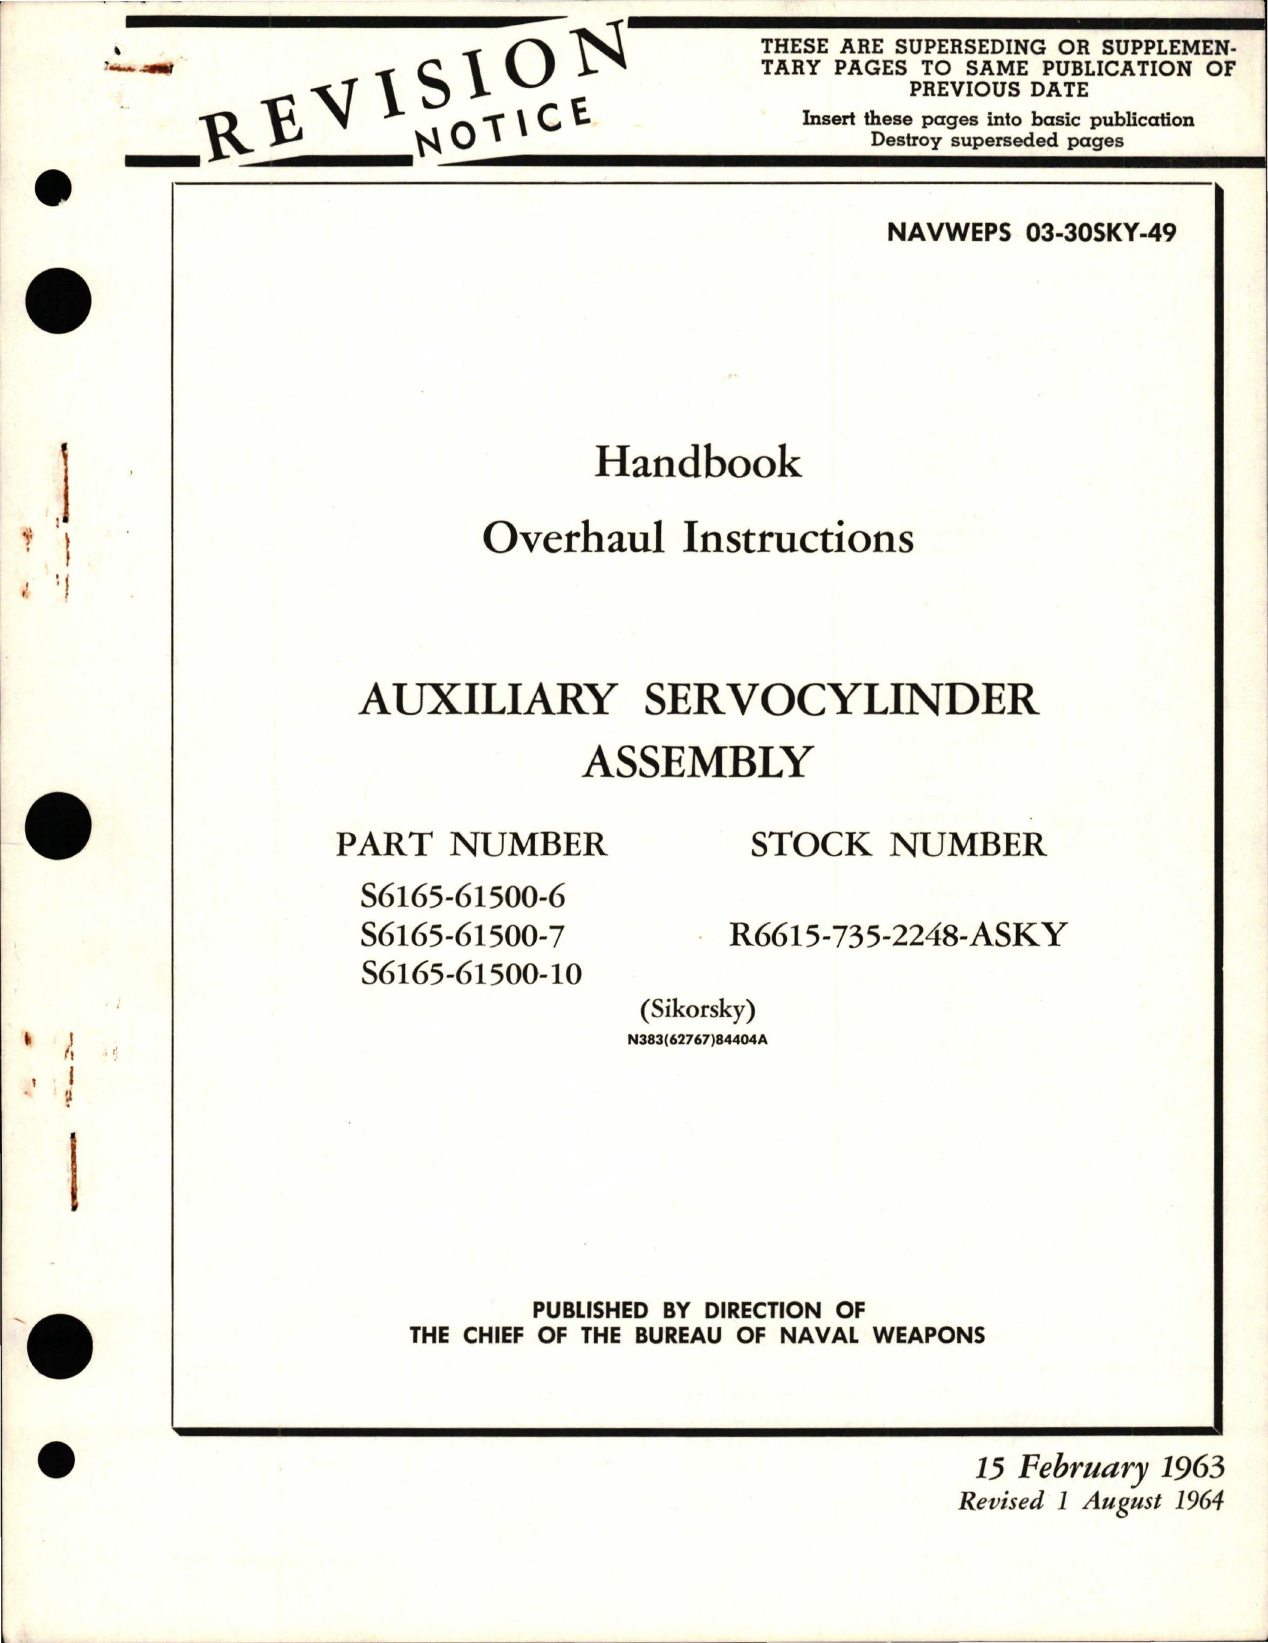 Sample page 1 from AirCorps Library document: Overhaul Instructions for Auxiliary Servocylinder Assembly - Parts S6165-61500-6, S6165-61500-7, and S6165-61500-10 